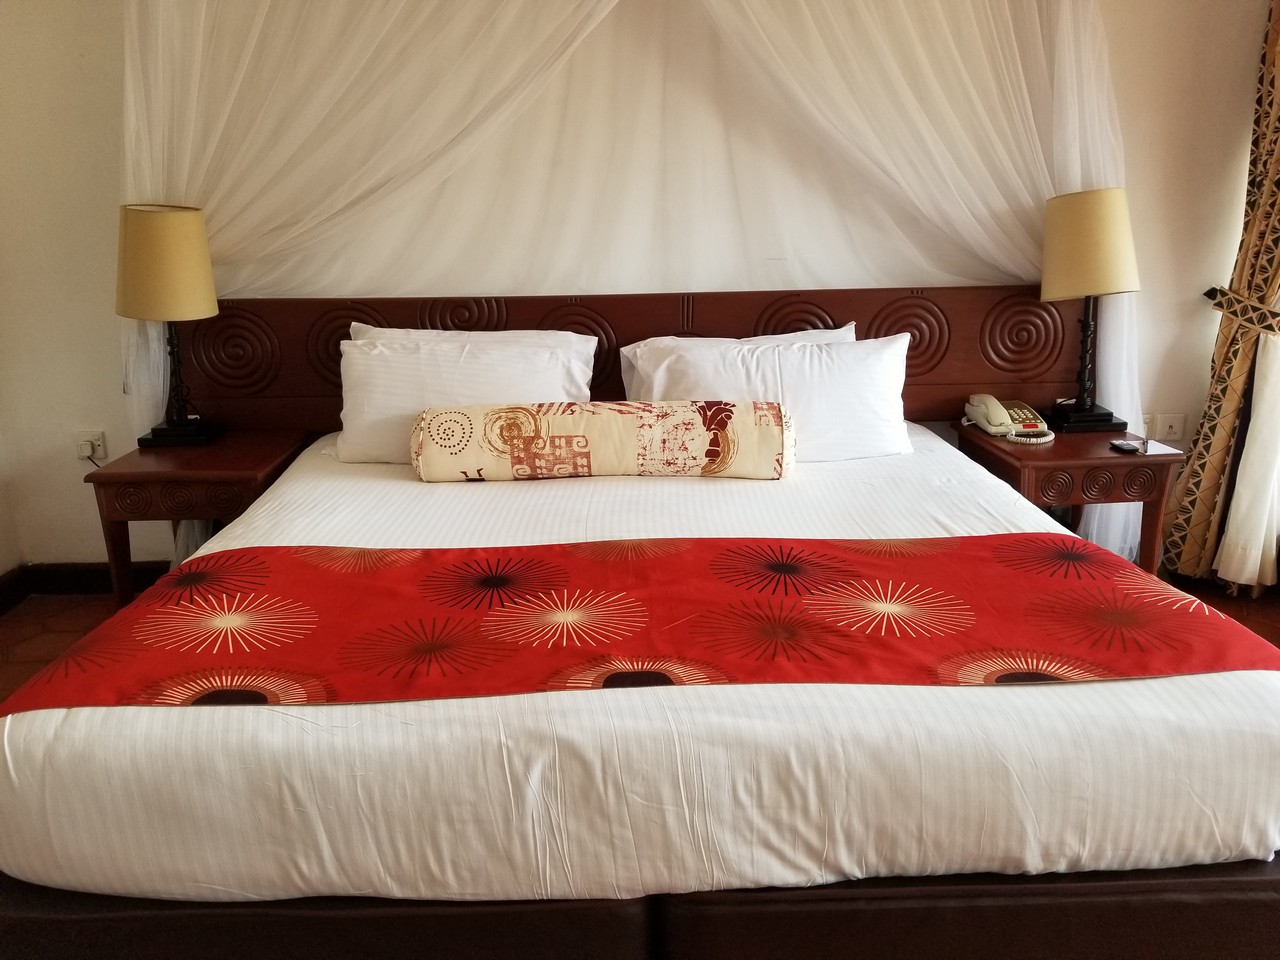 a bed with a red blanket and lamps